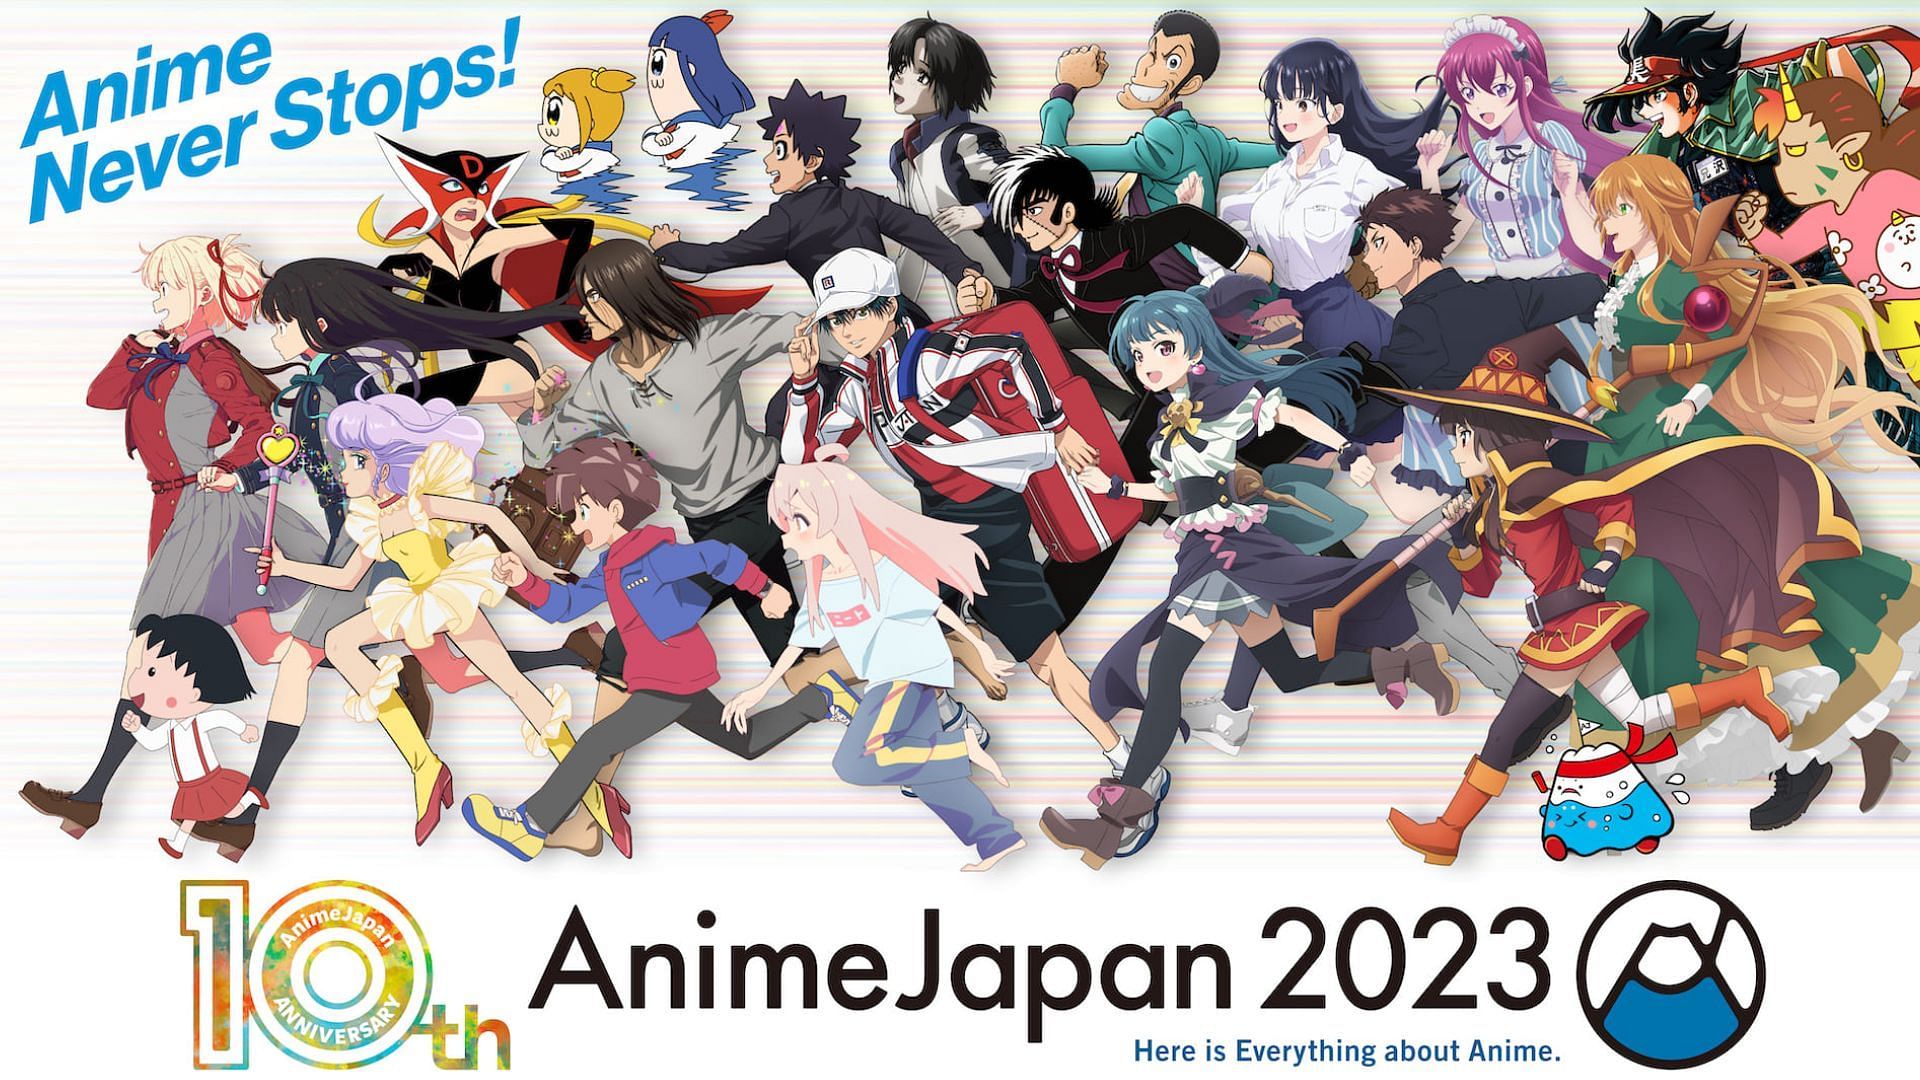 Anime Japan 2023 (Roundup) All announcements, teaser & trailers, and more